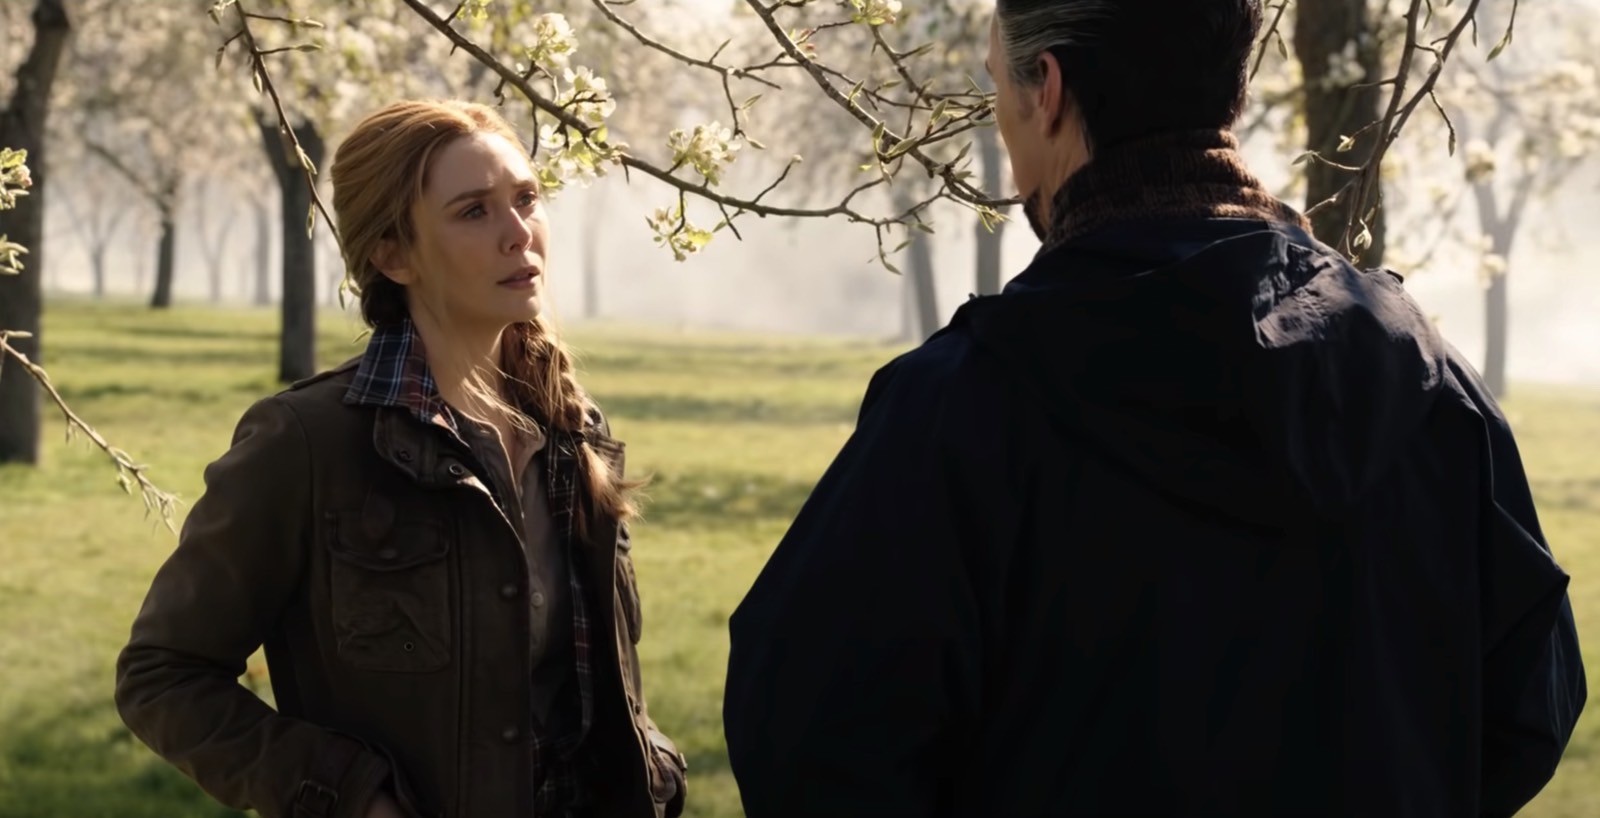 Wanda and Doctor Strange in Multiverse of Madness trailer